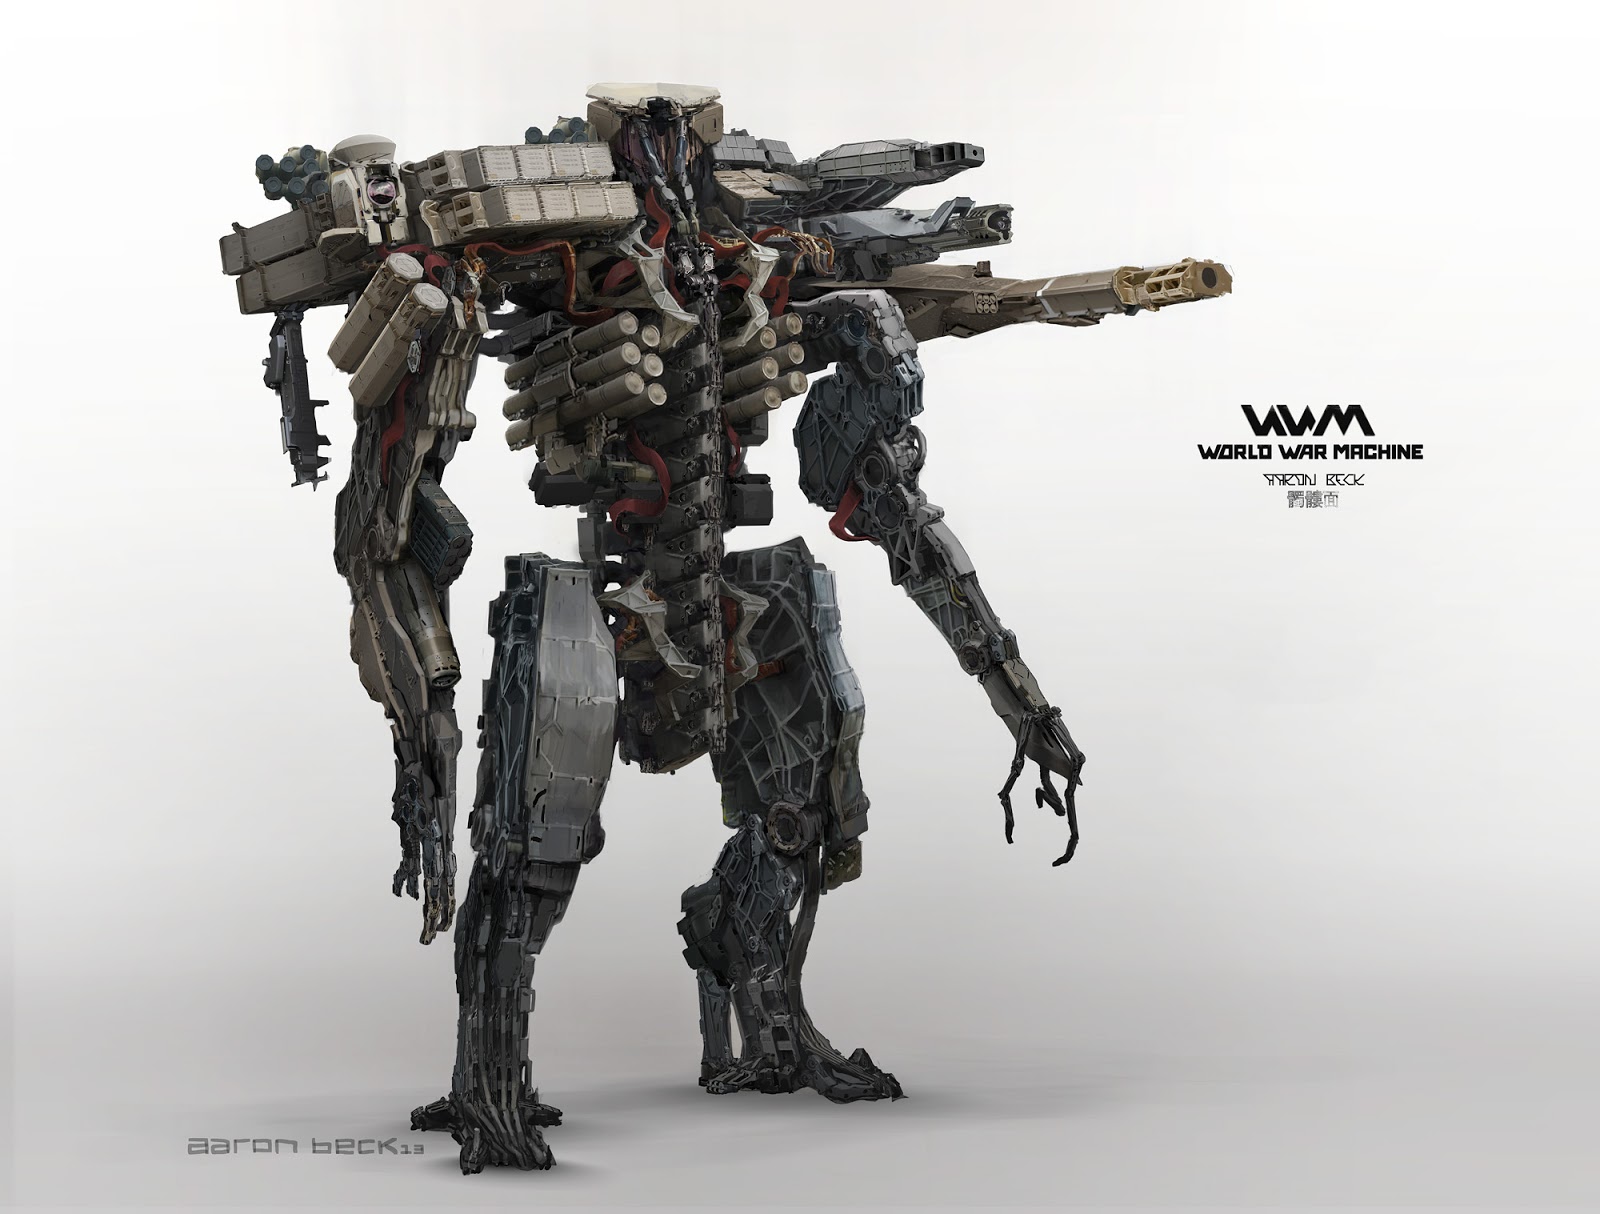 Fine Art: Now These Are Some Good-Lookin’ Giant Robots